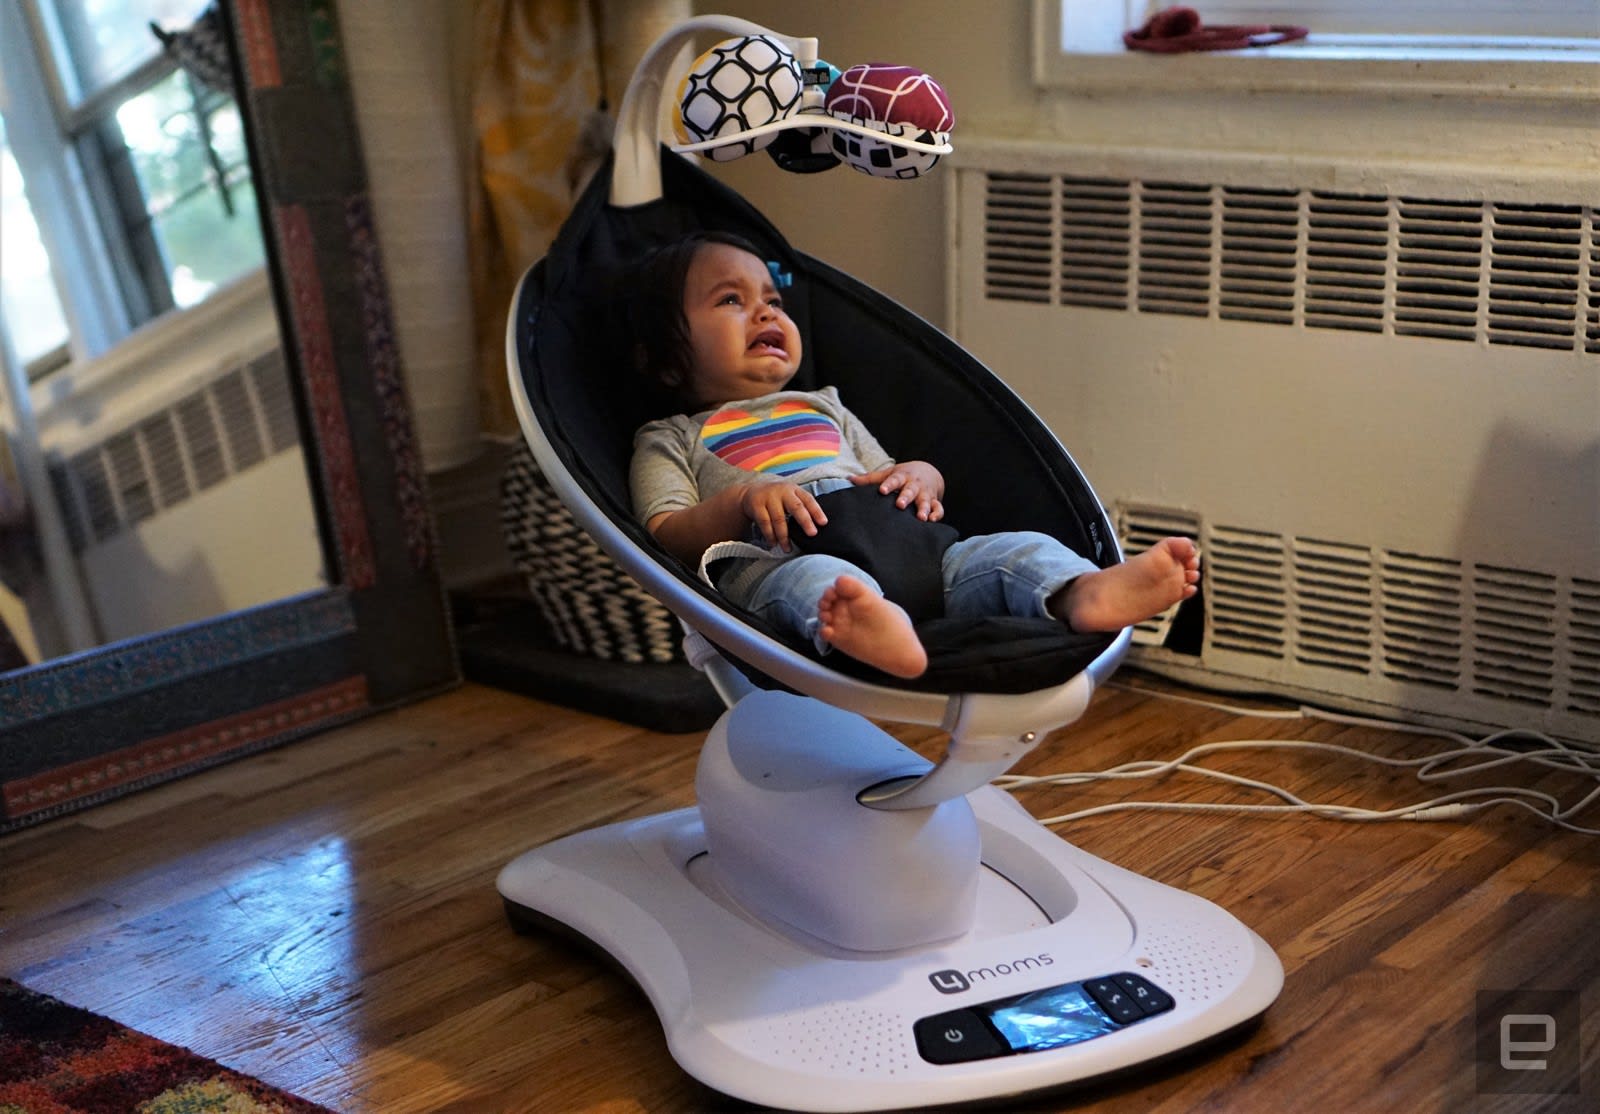 The MamaRoo automatic baby swing 